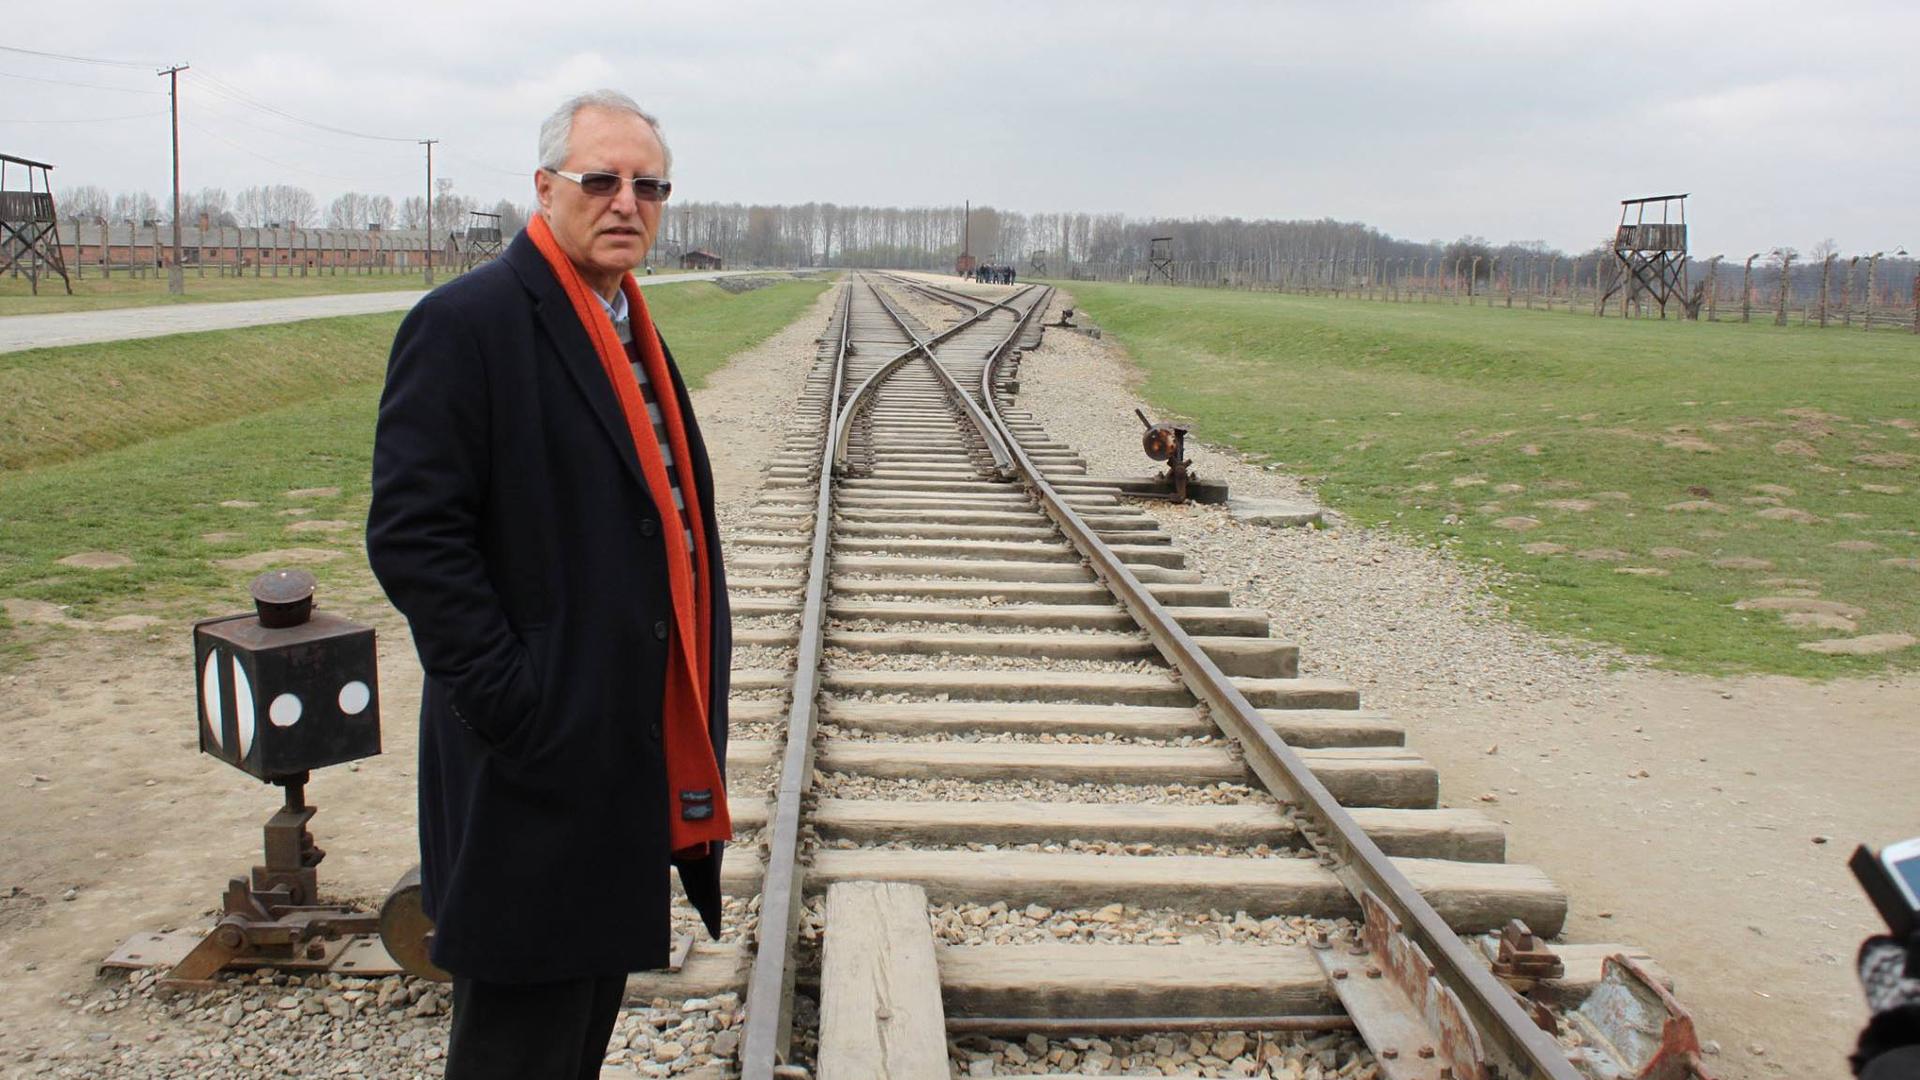 American Studies professor Mohammed Dajani took a group of Palestinian students on a trip to Auschwitz in March, 2014.